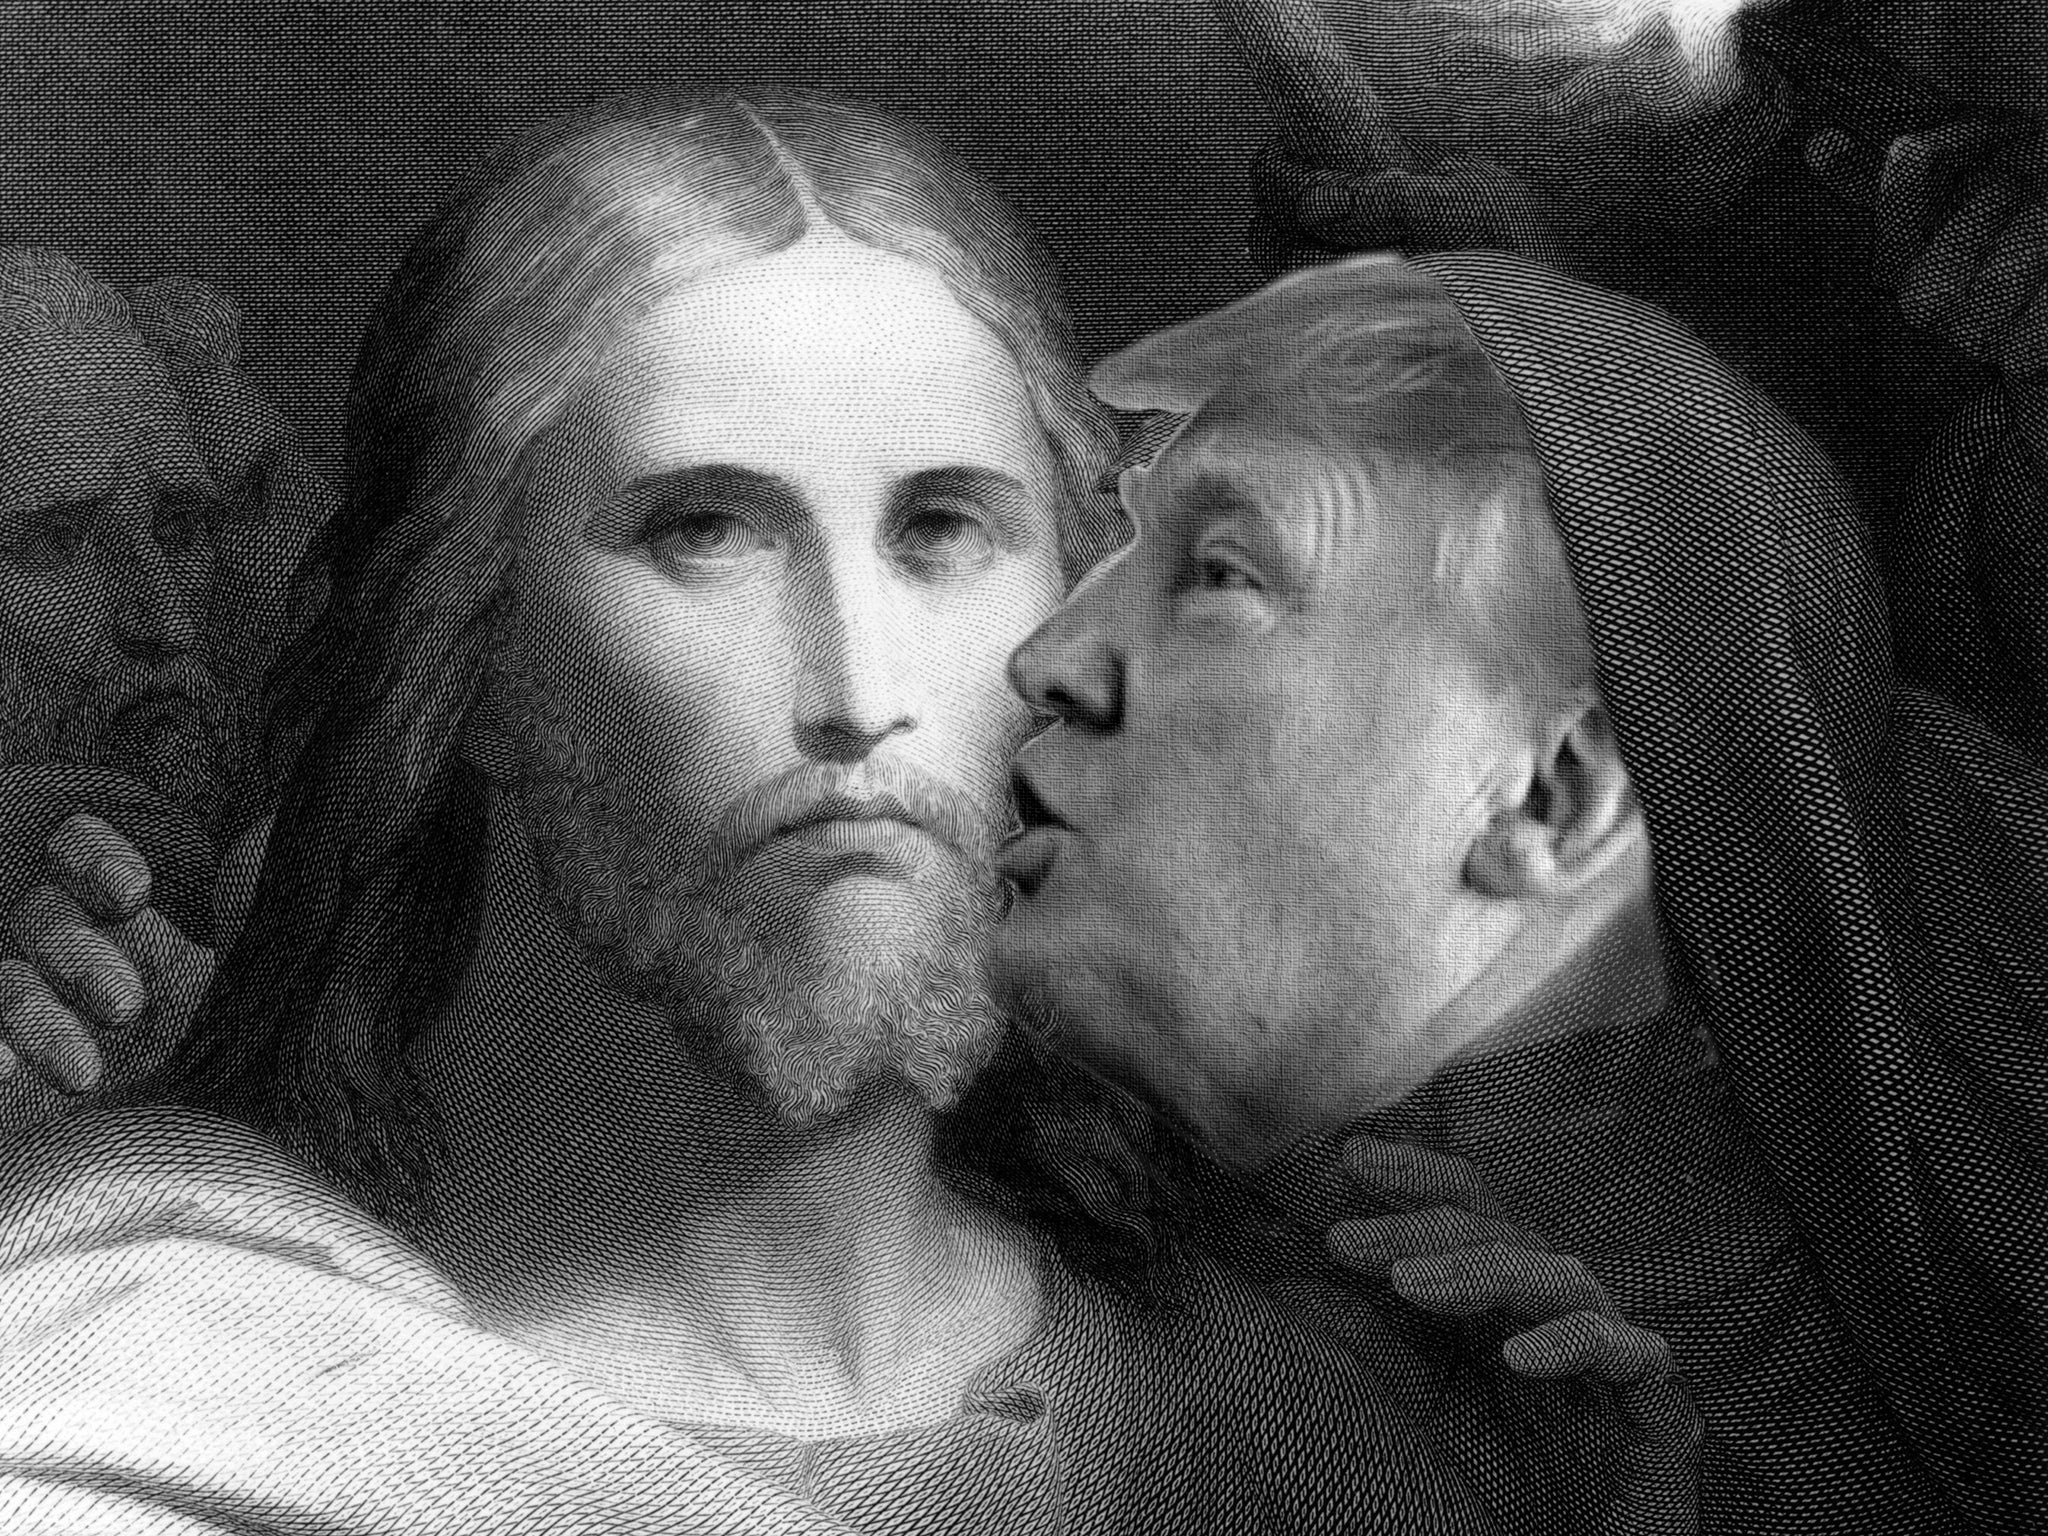 No "The kiss of trump" memes have been featured yet. 